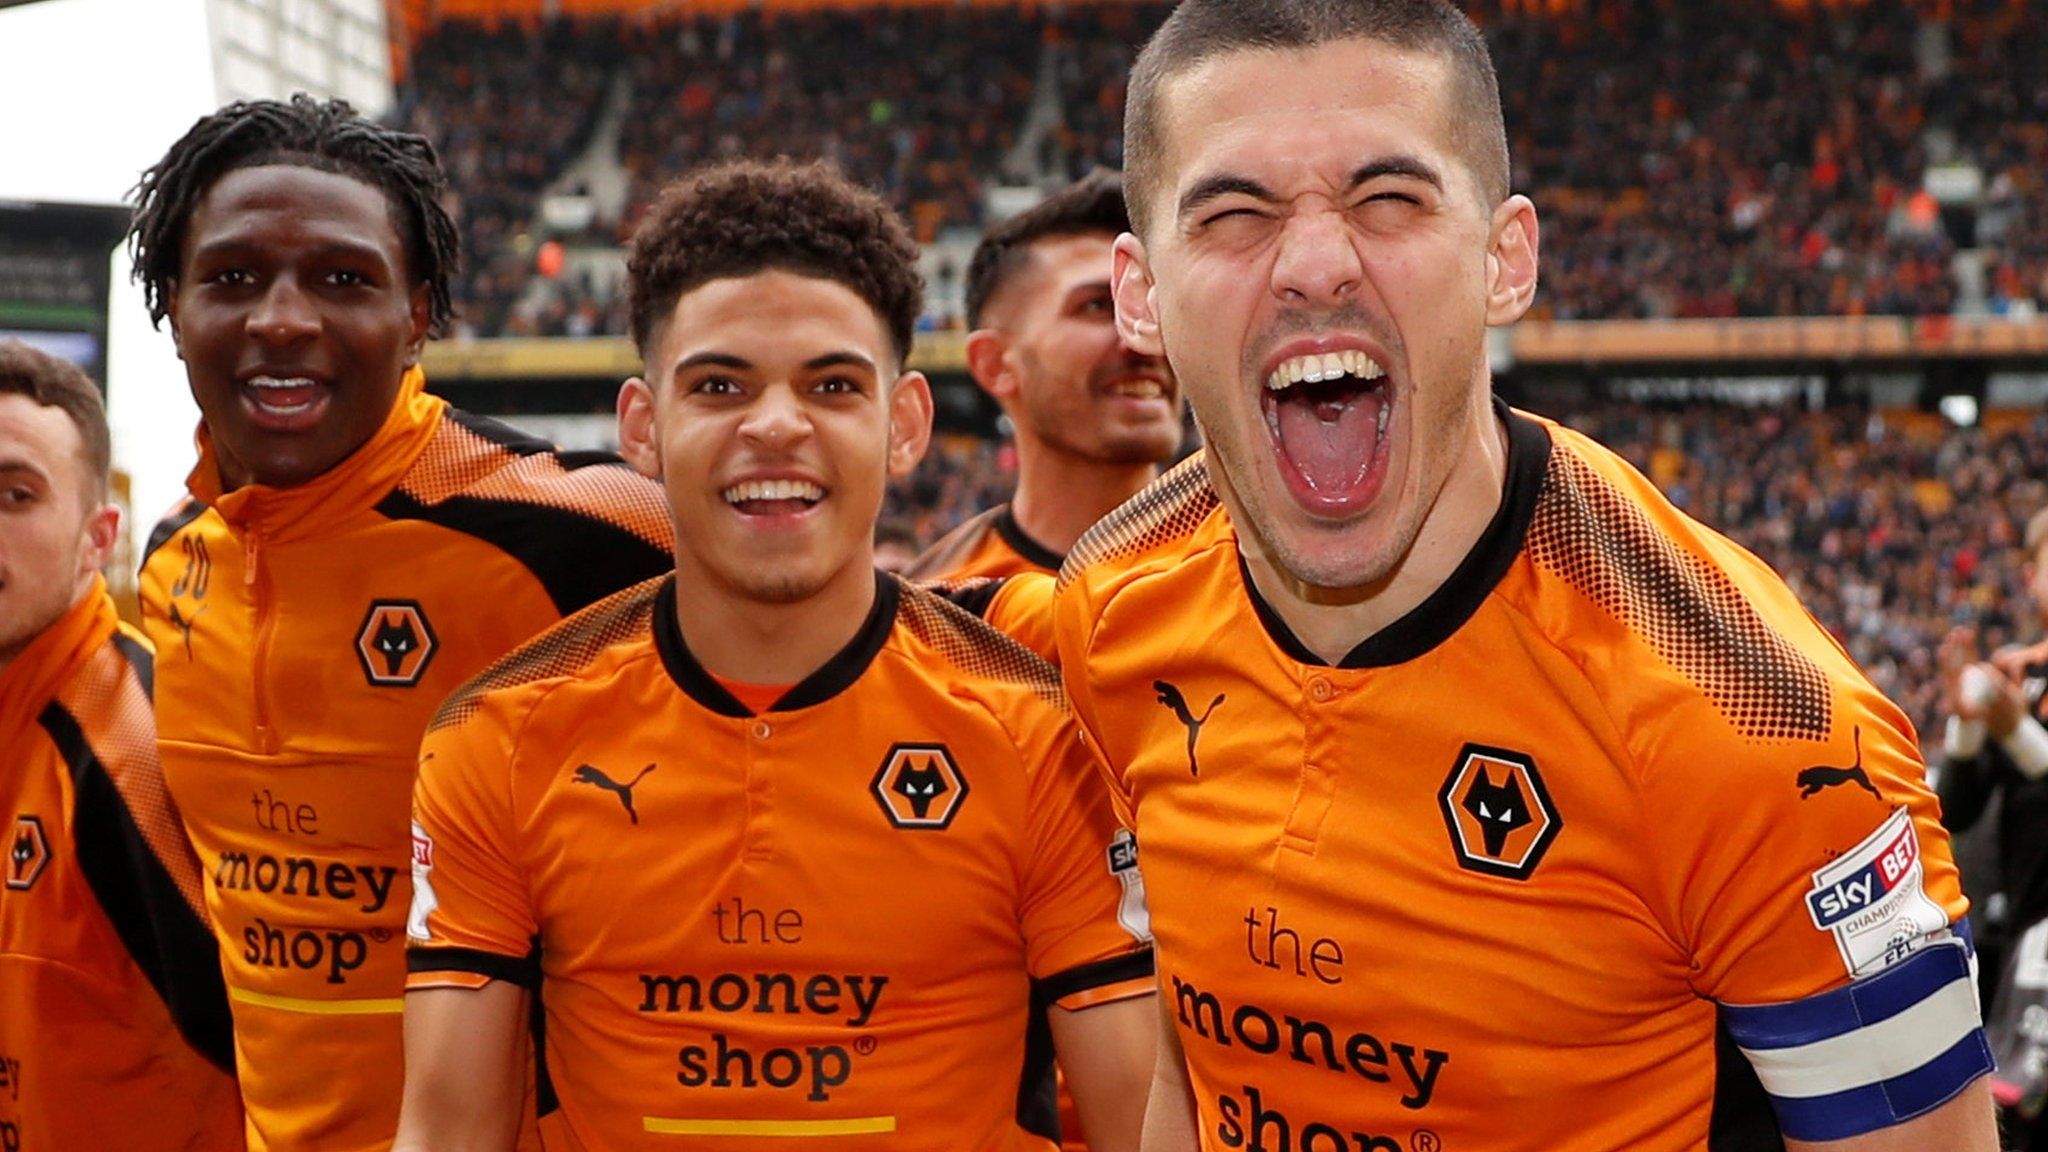 Wolverhampton Wanderers celebrate being promoted to the Premier League